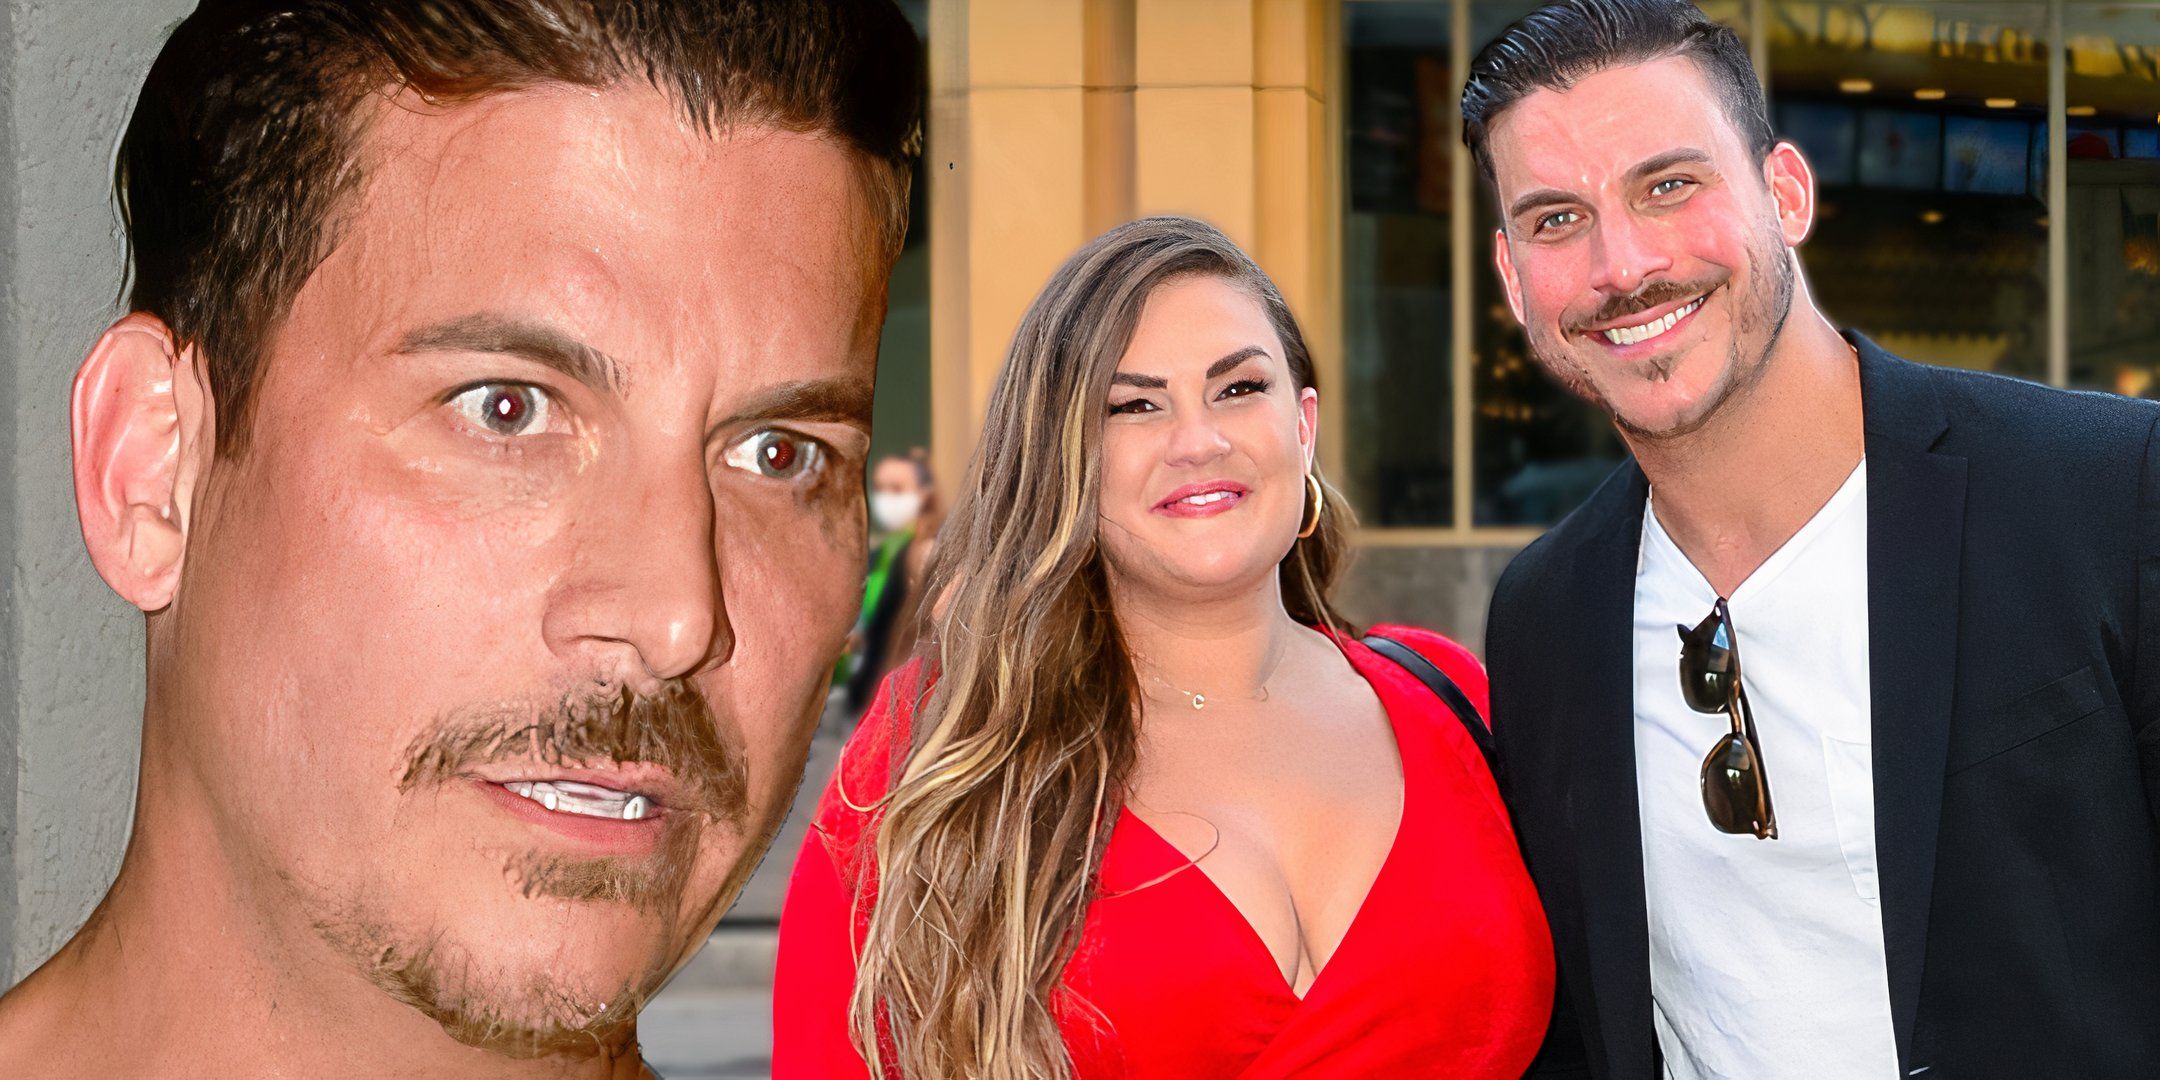 Did The Valley's Jax Taylor's Past Insecurities Lead To Separation From Brittany Cartwright?